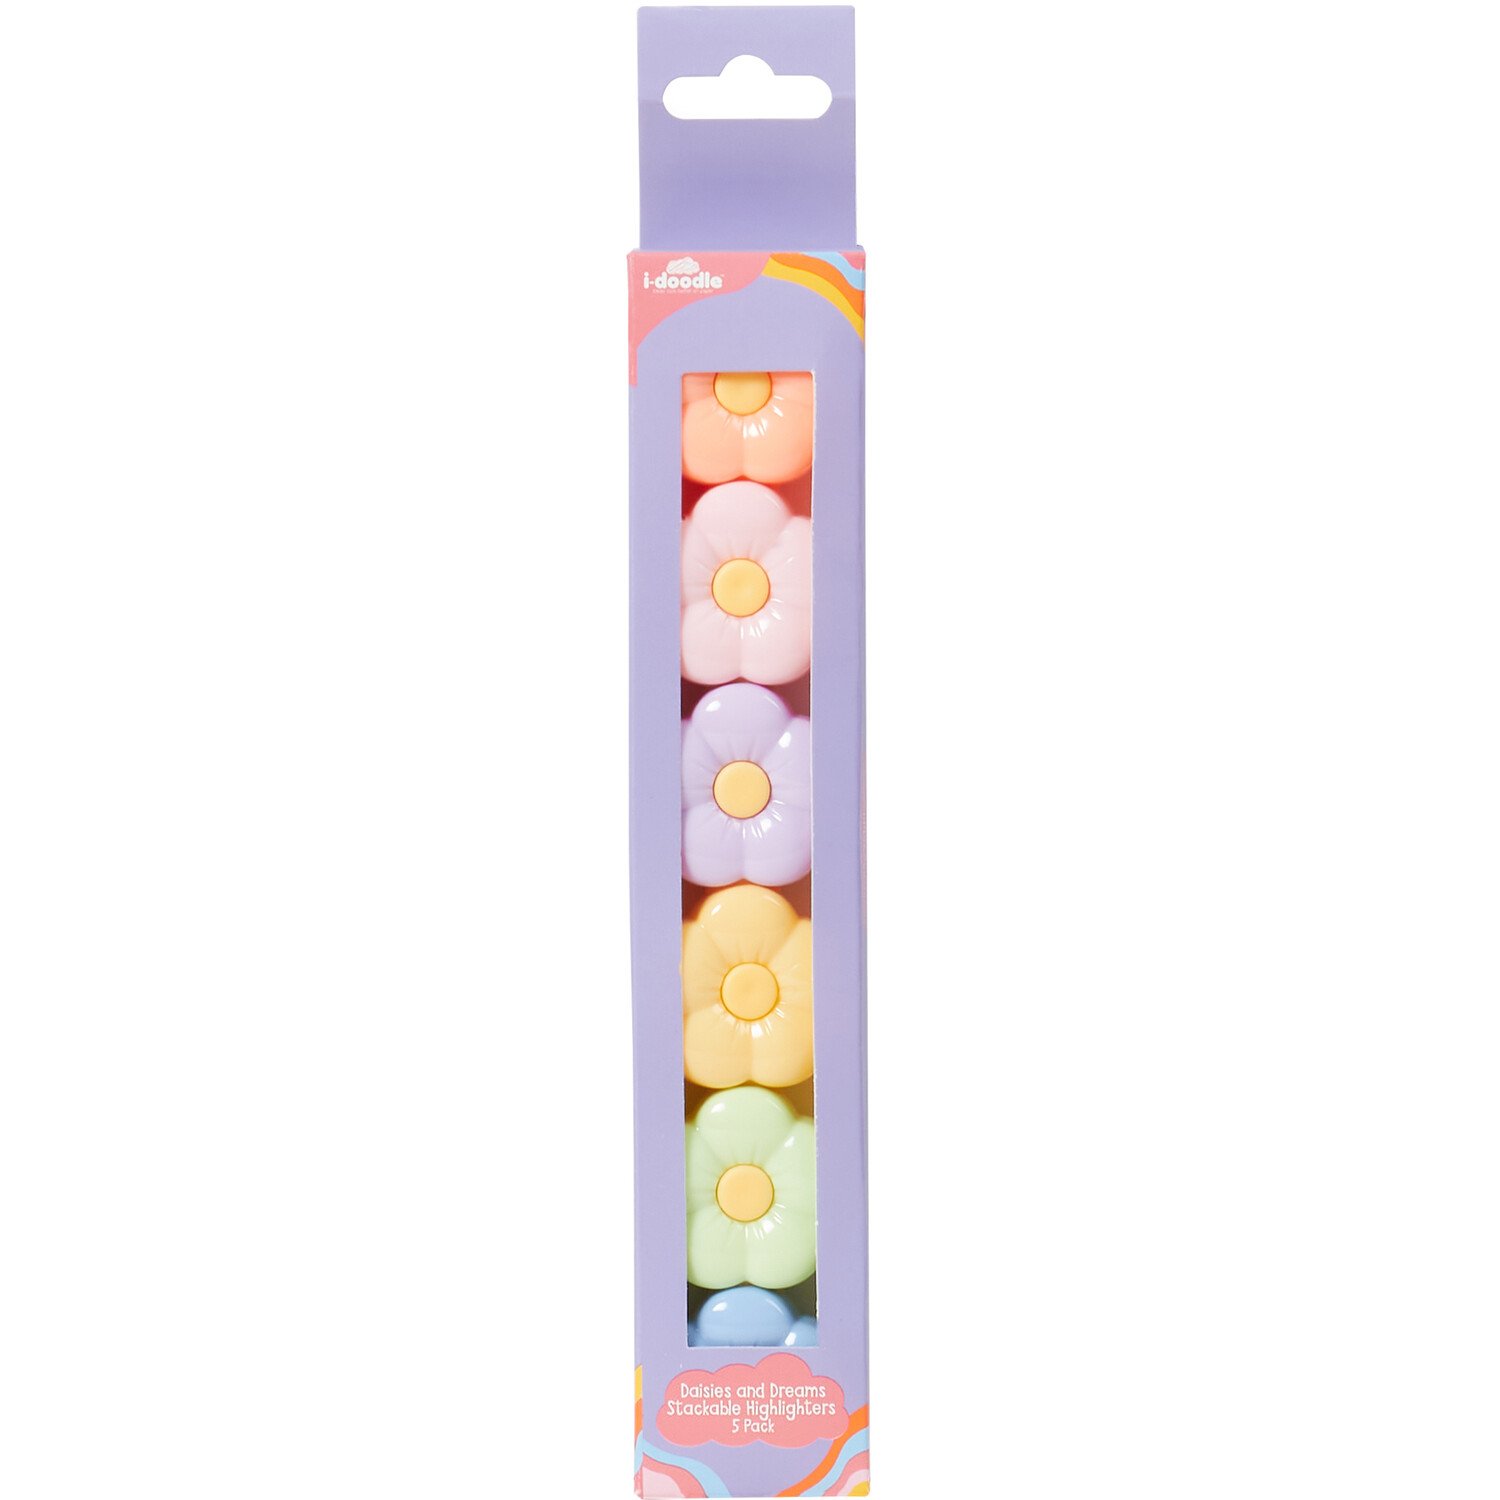 i-doodle Daisies and Dreams Stackable Highlighter 6 Pack Image 1